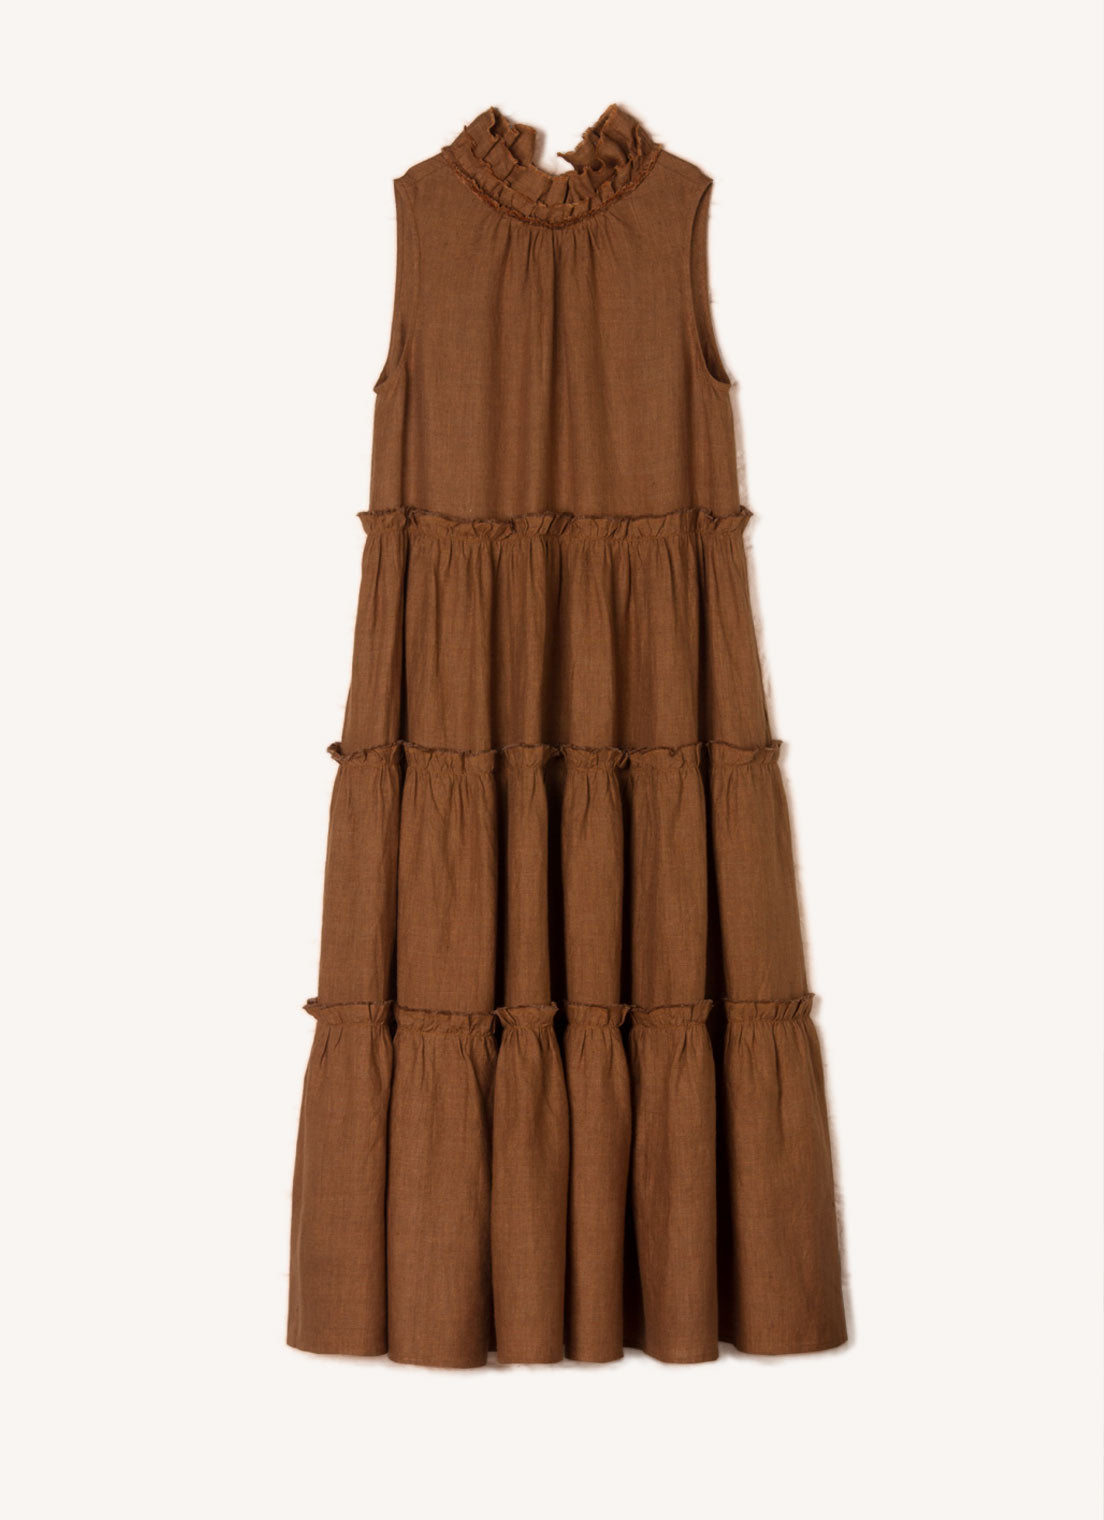 A bronze, sleeveless, pure European linen, tiered dress with ruffled collar and detailing